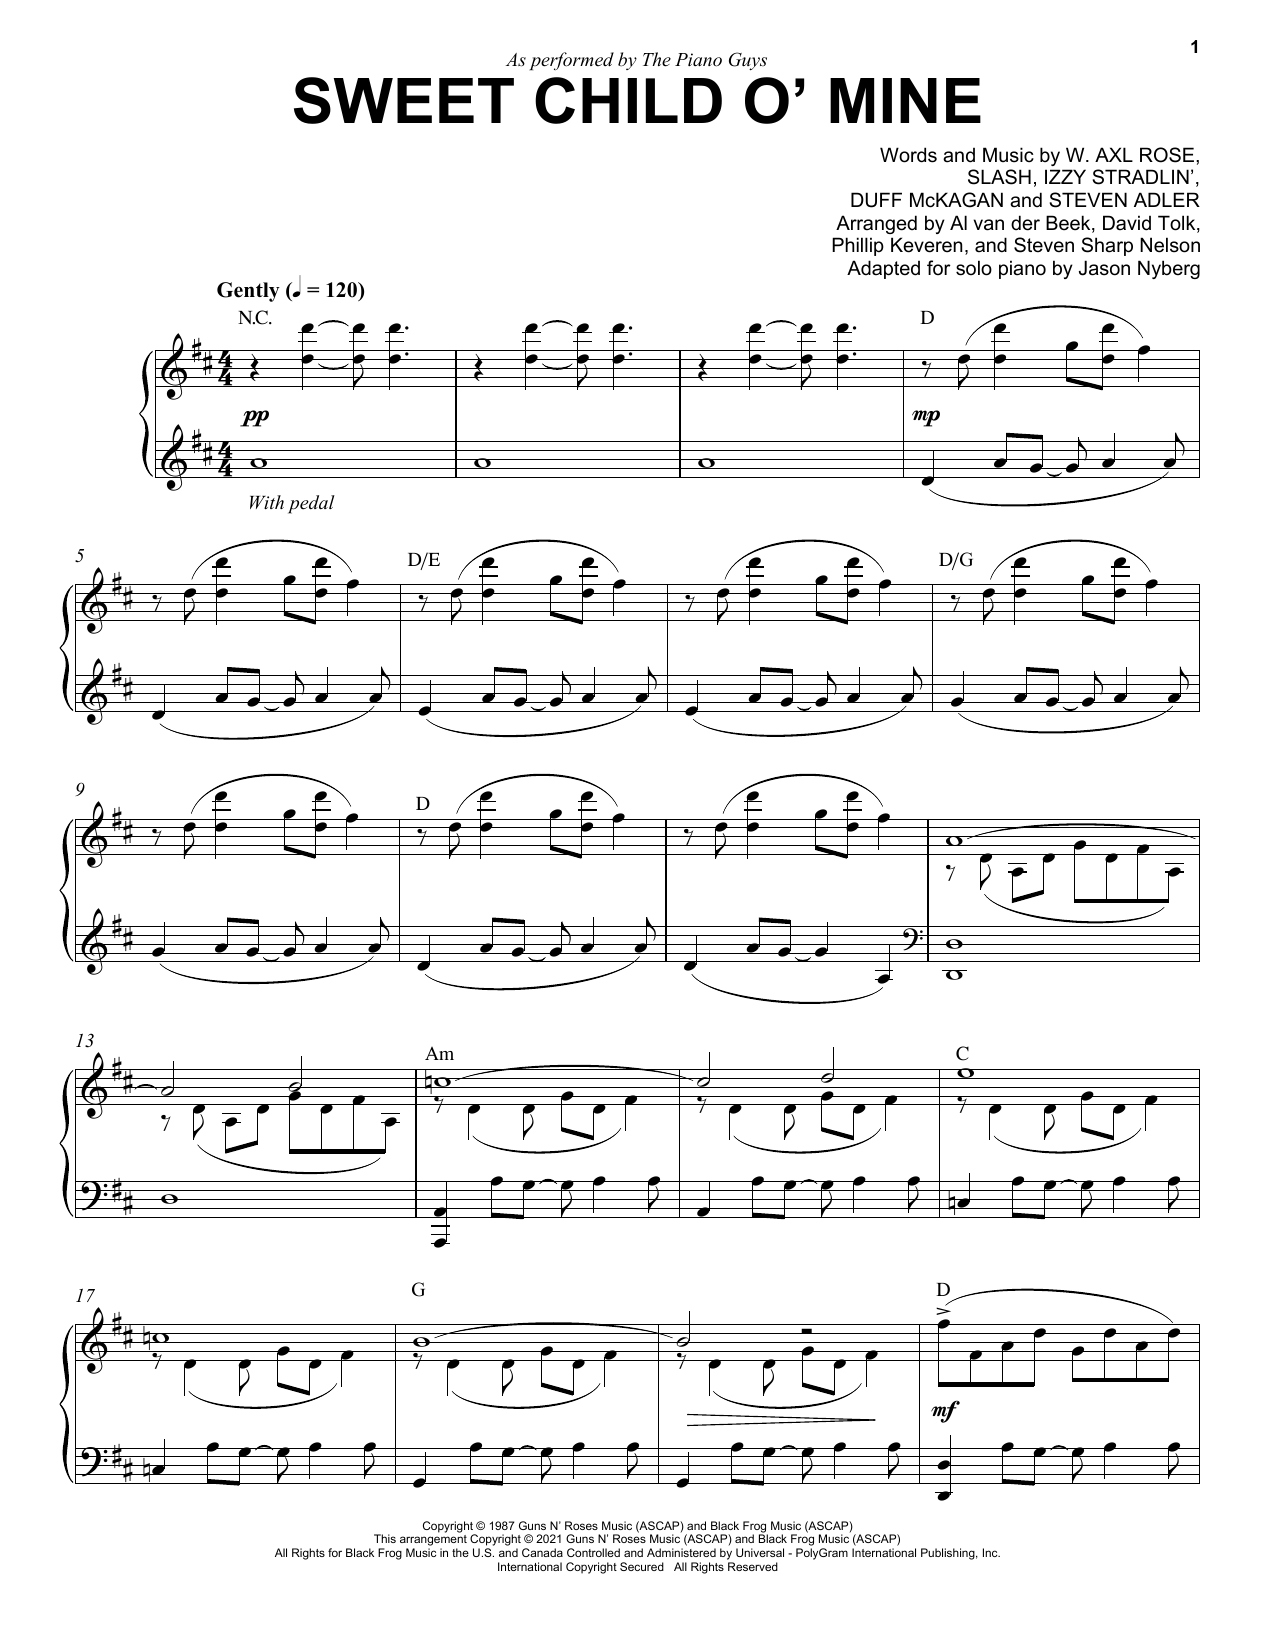 Download The Piano Guys Sweet Child O' Mine Sheet Music